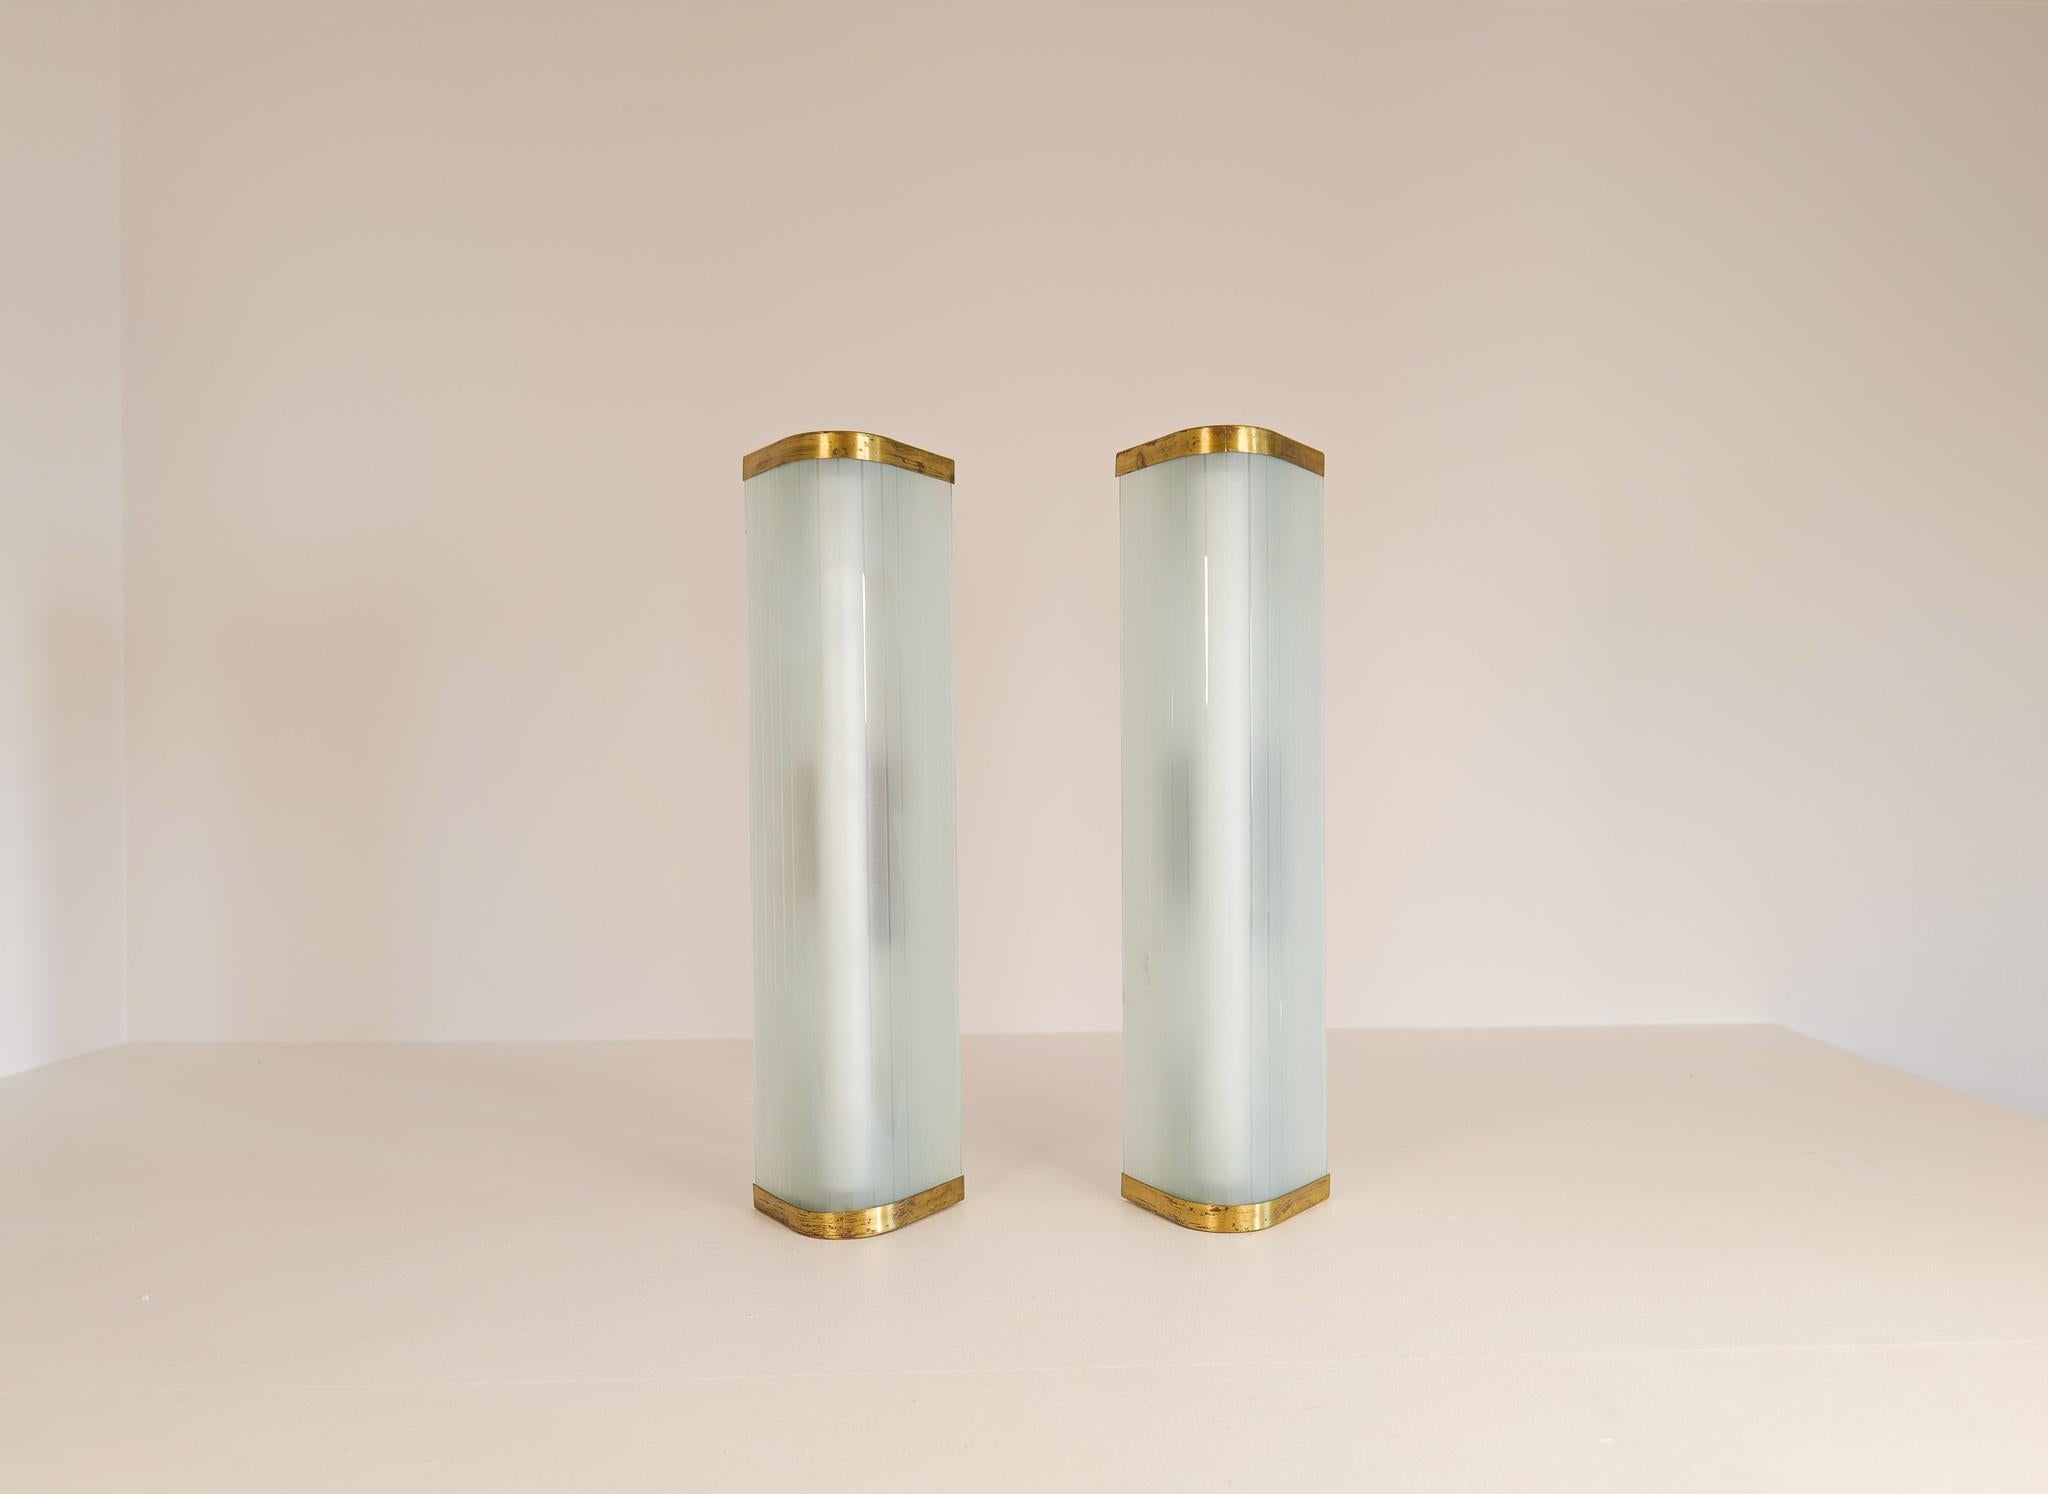 Swedish Midcentury Pair of Extra-Large Modern Wall Lamps Attributed to Asea For Sale